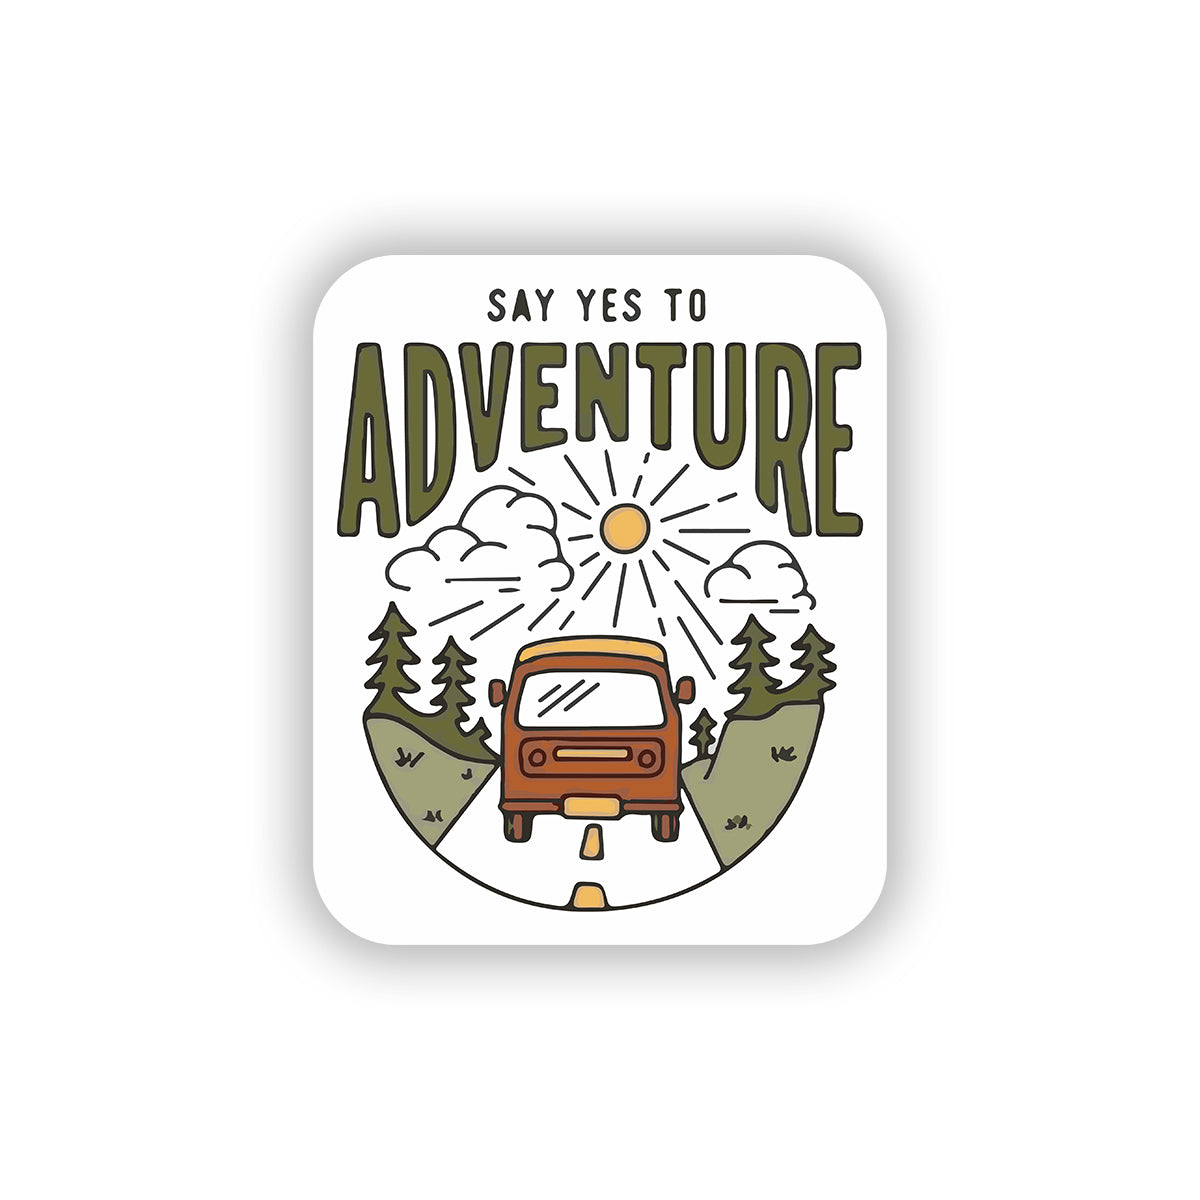 Say yes to adventure